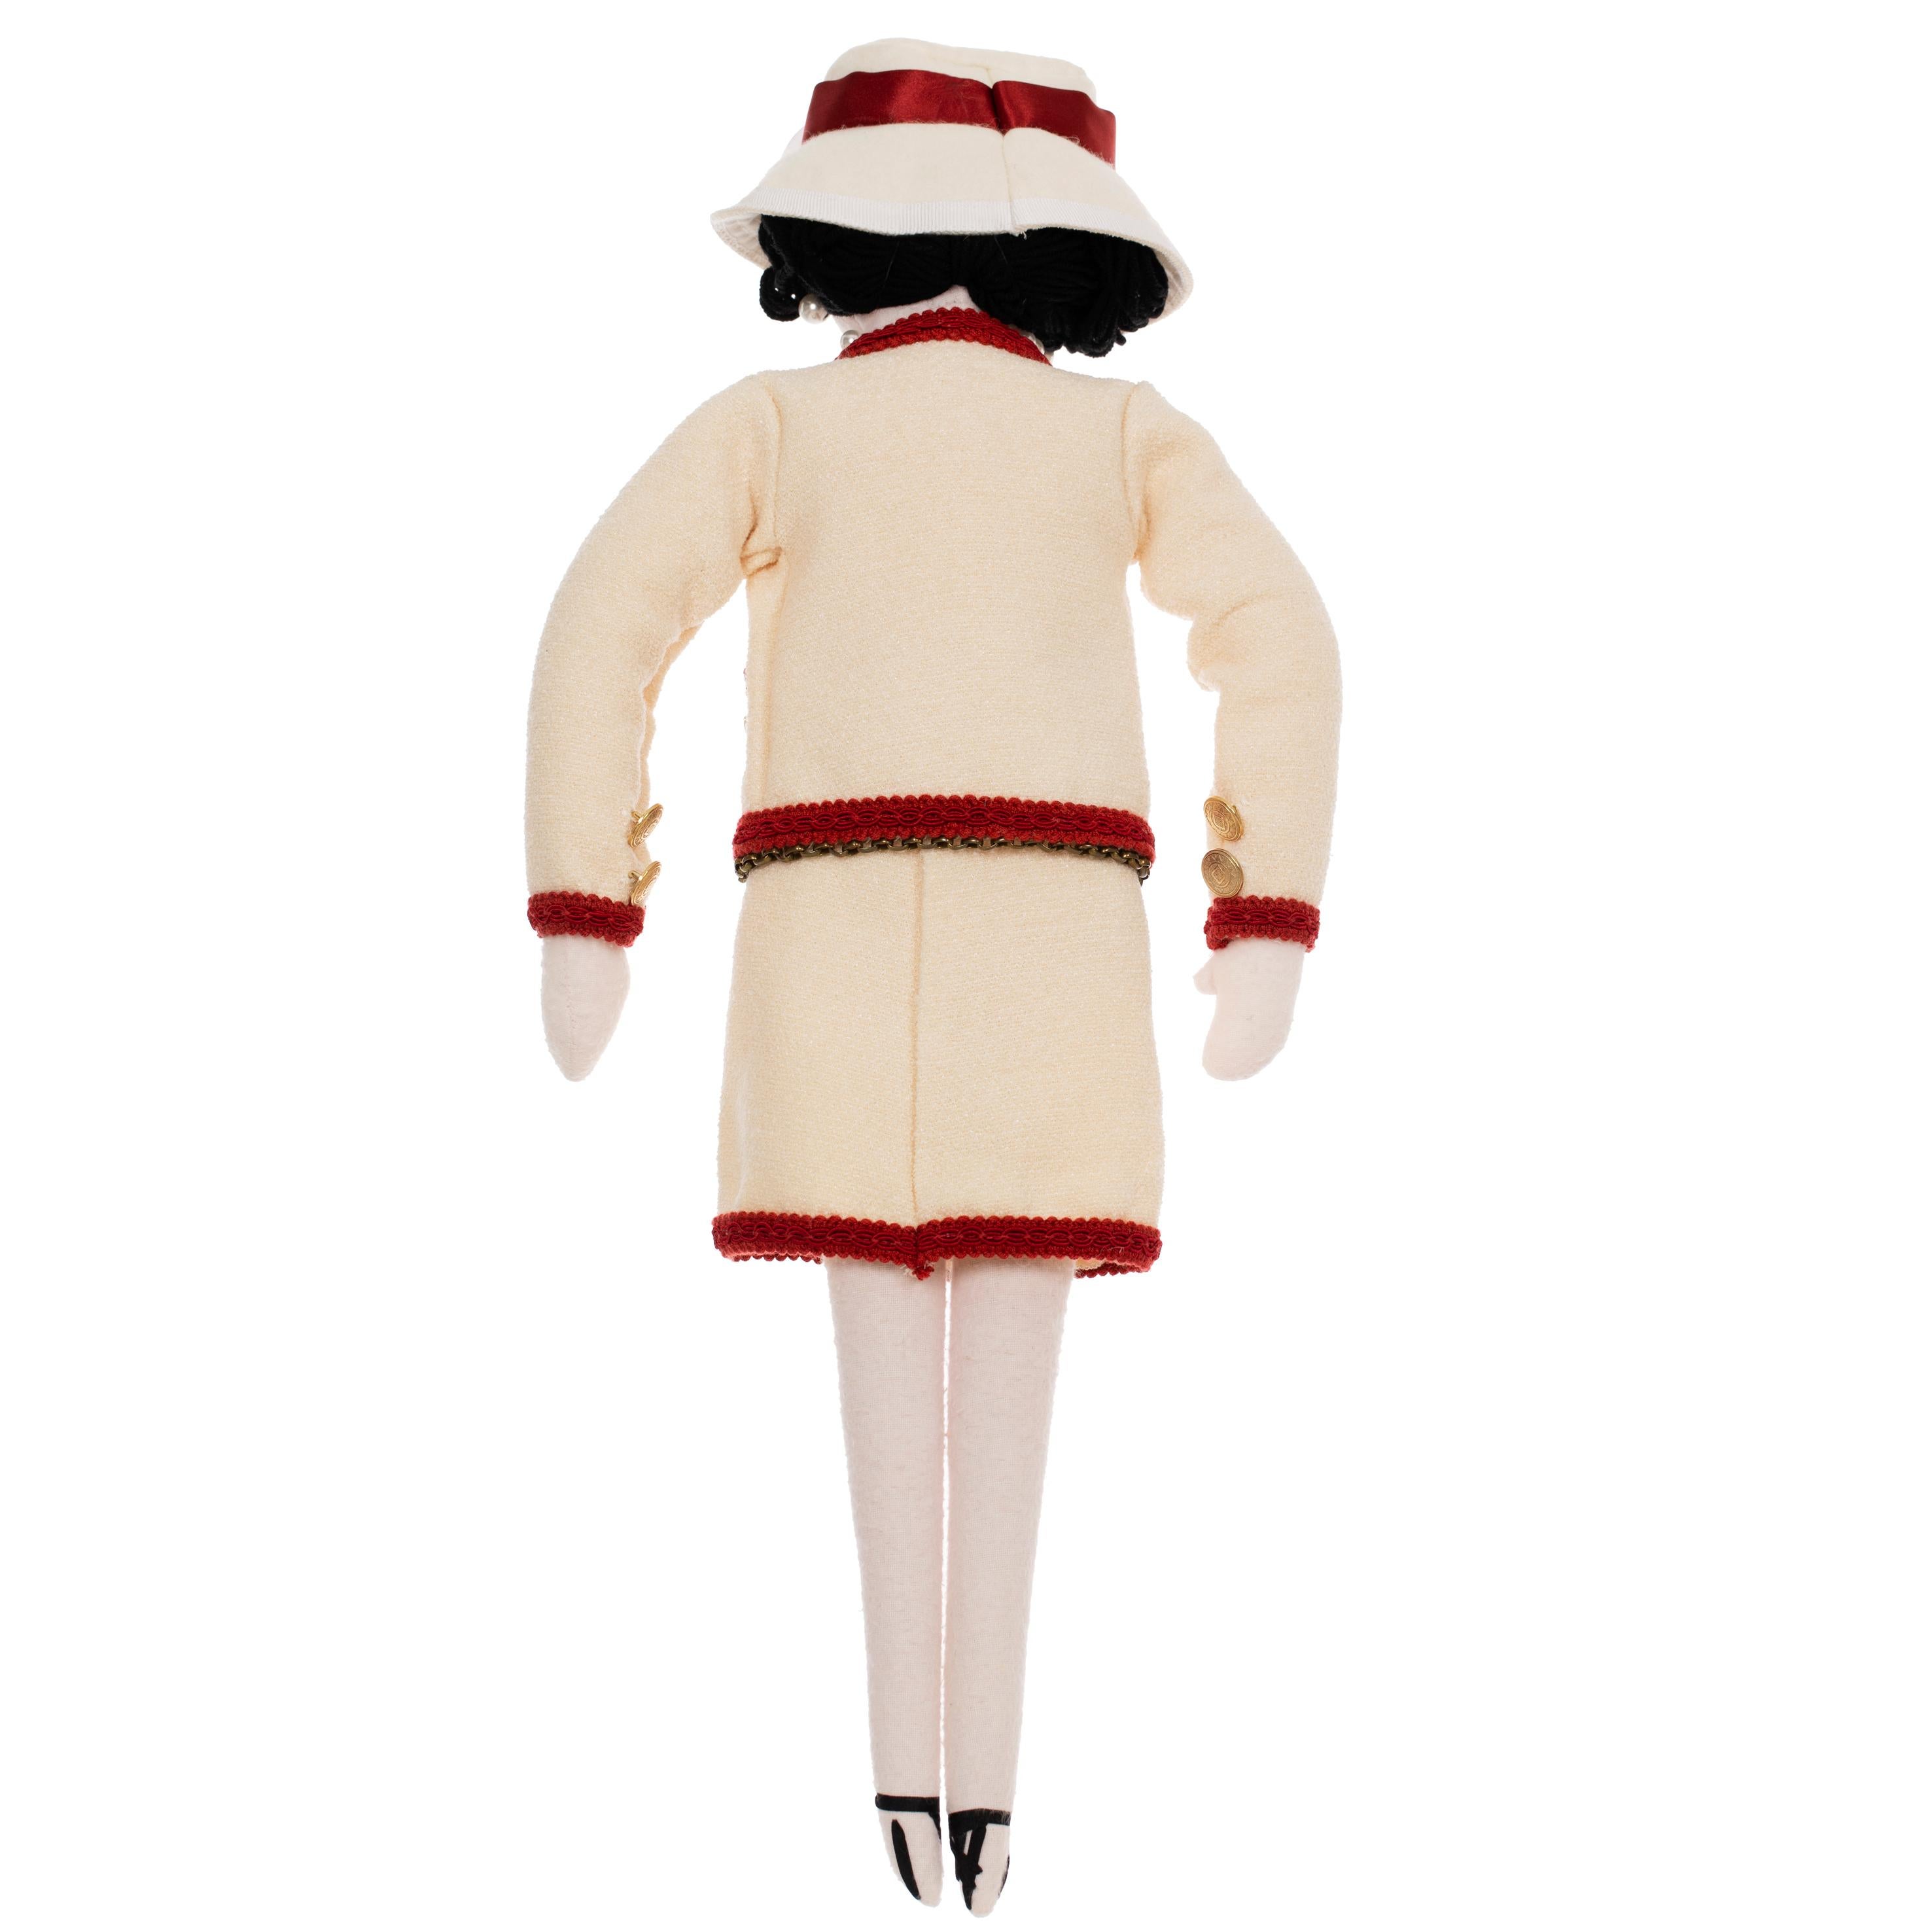 Women's or Men's Chanel 2010 Mademoiselle Coco Rag Doll For Sale